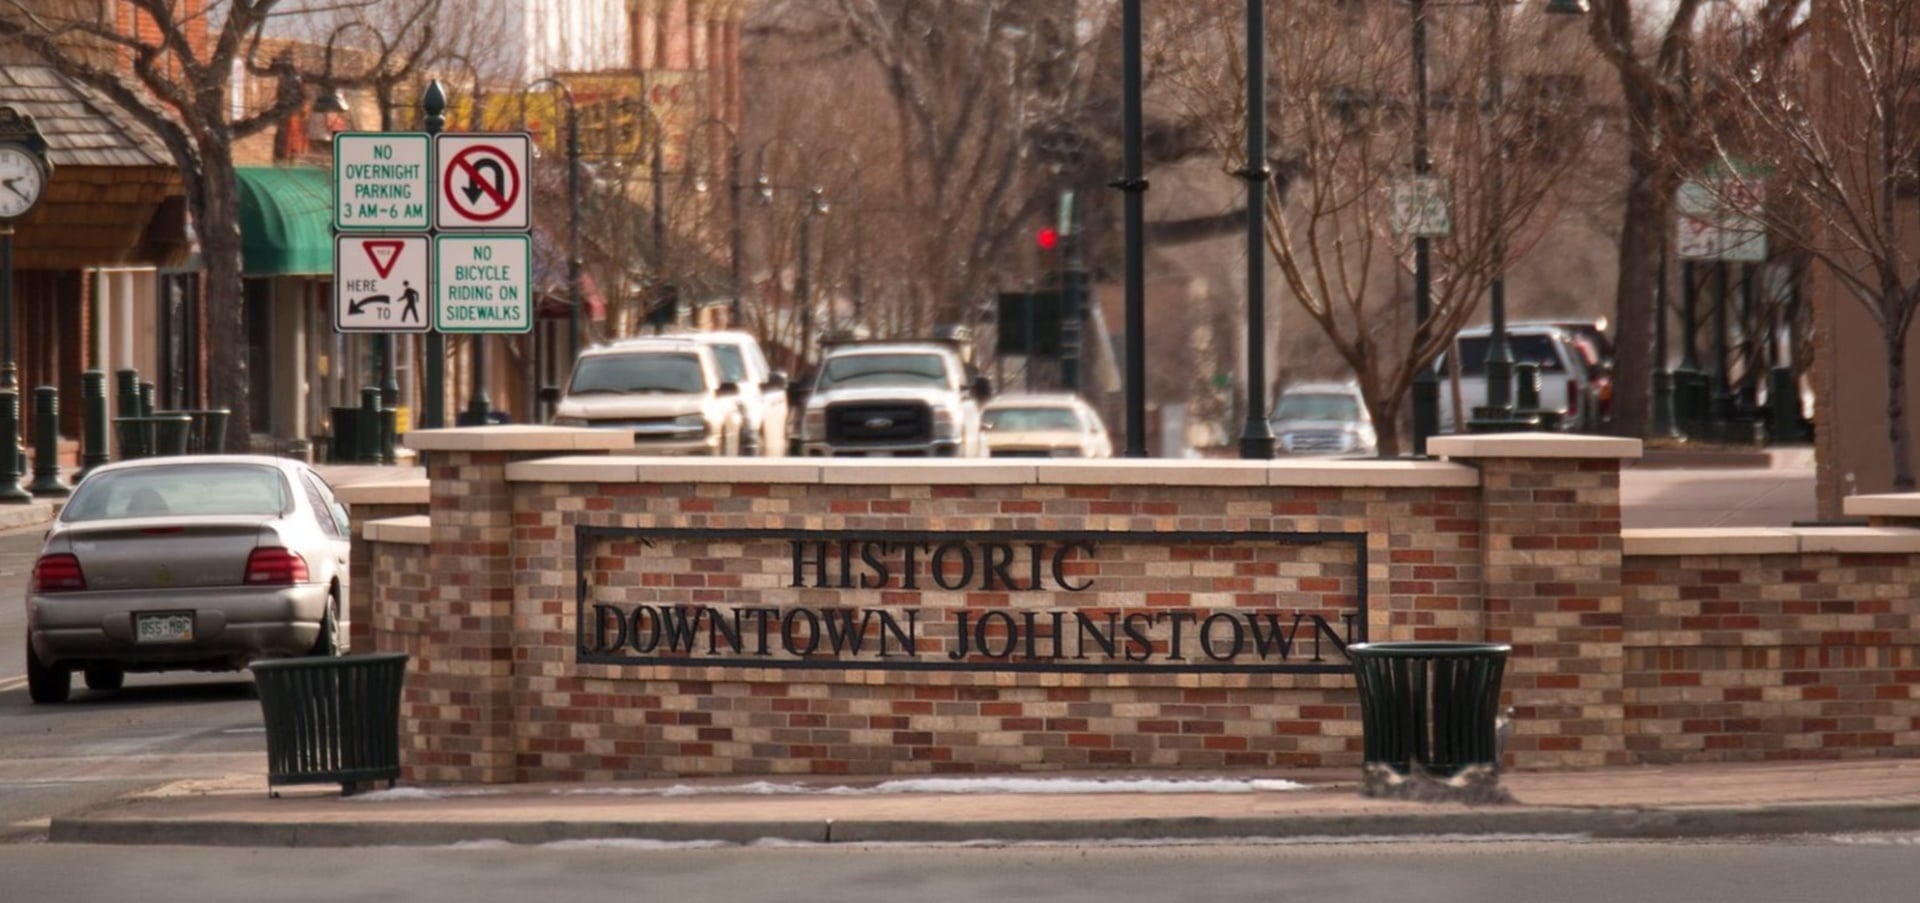 Historic downtown Johnstown entry sign